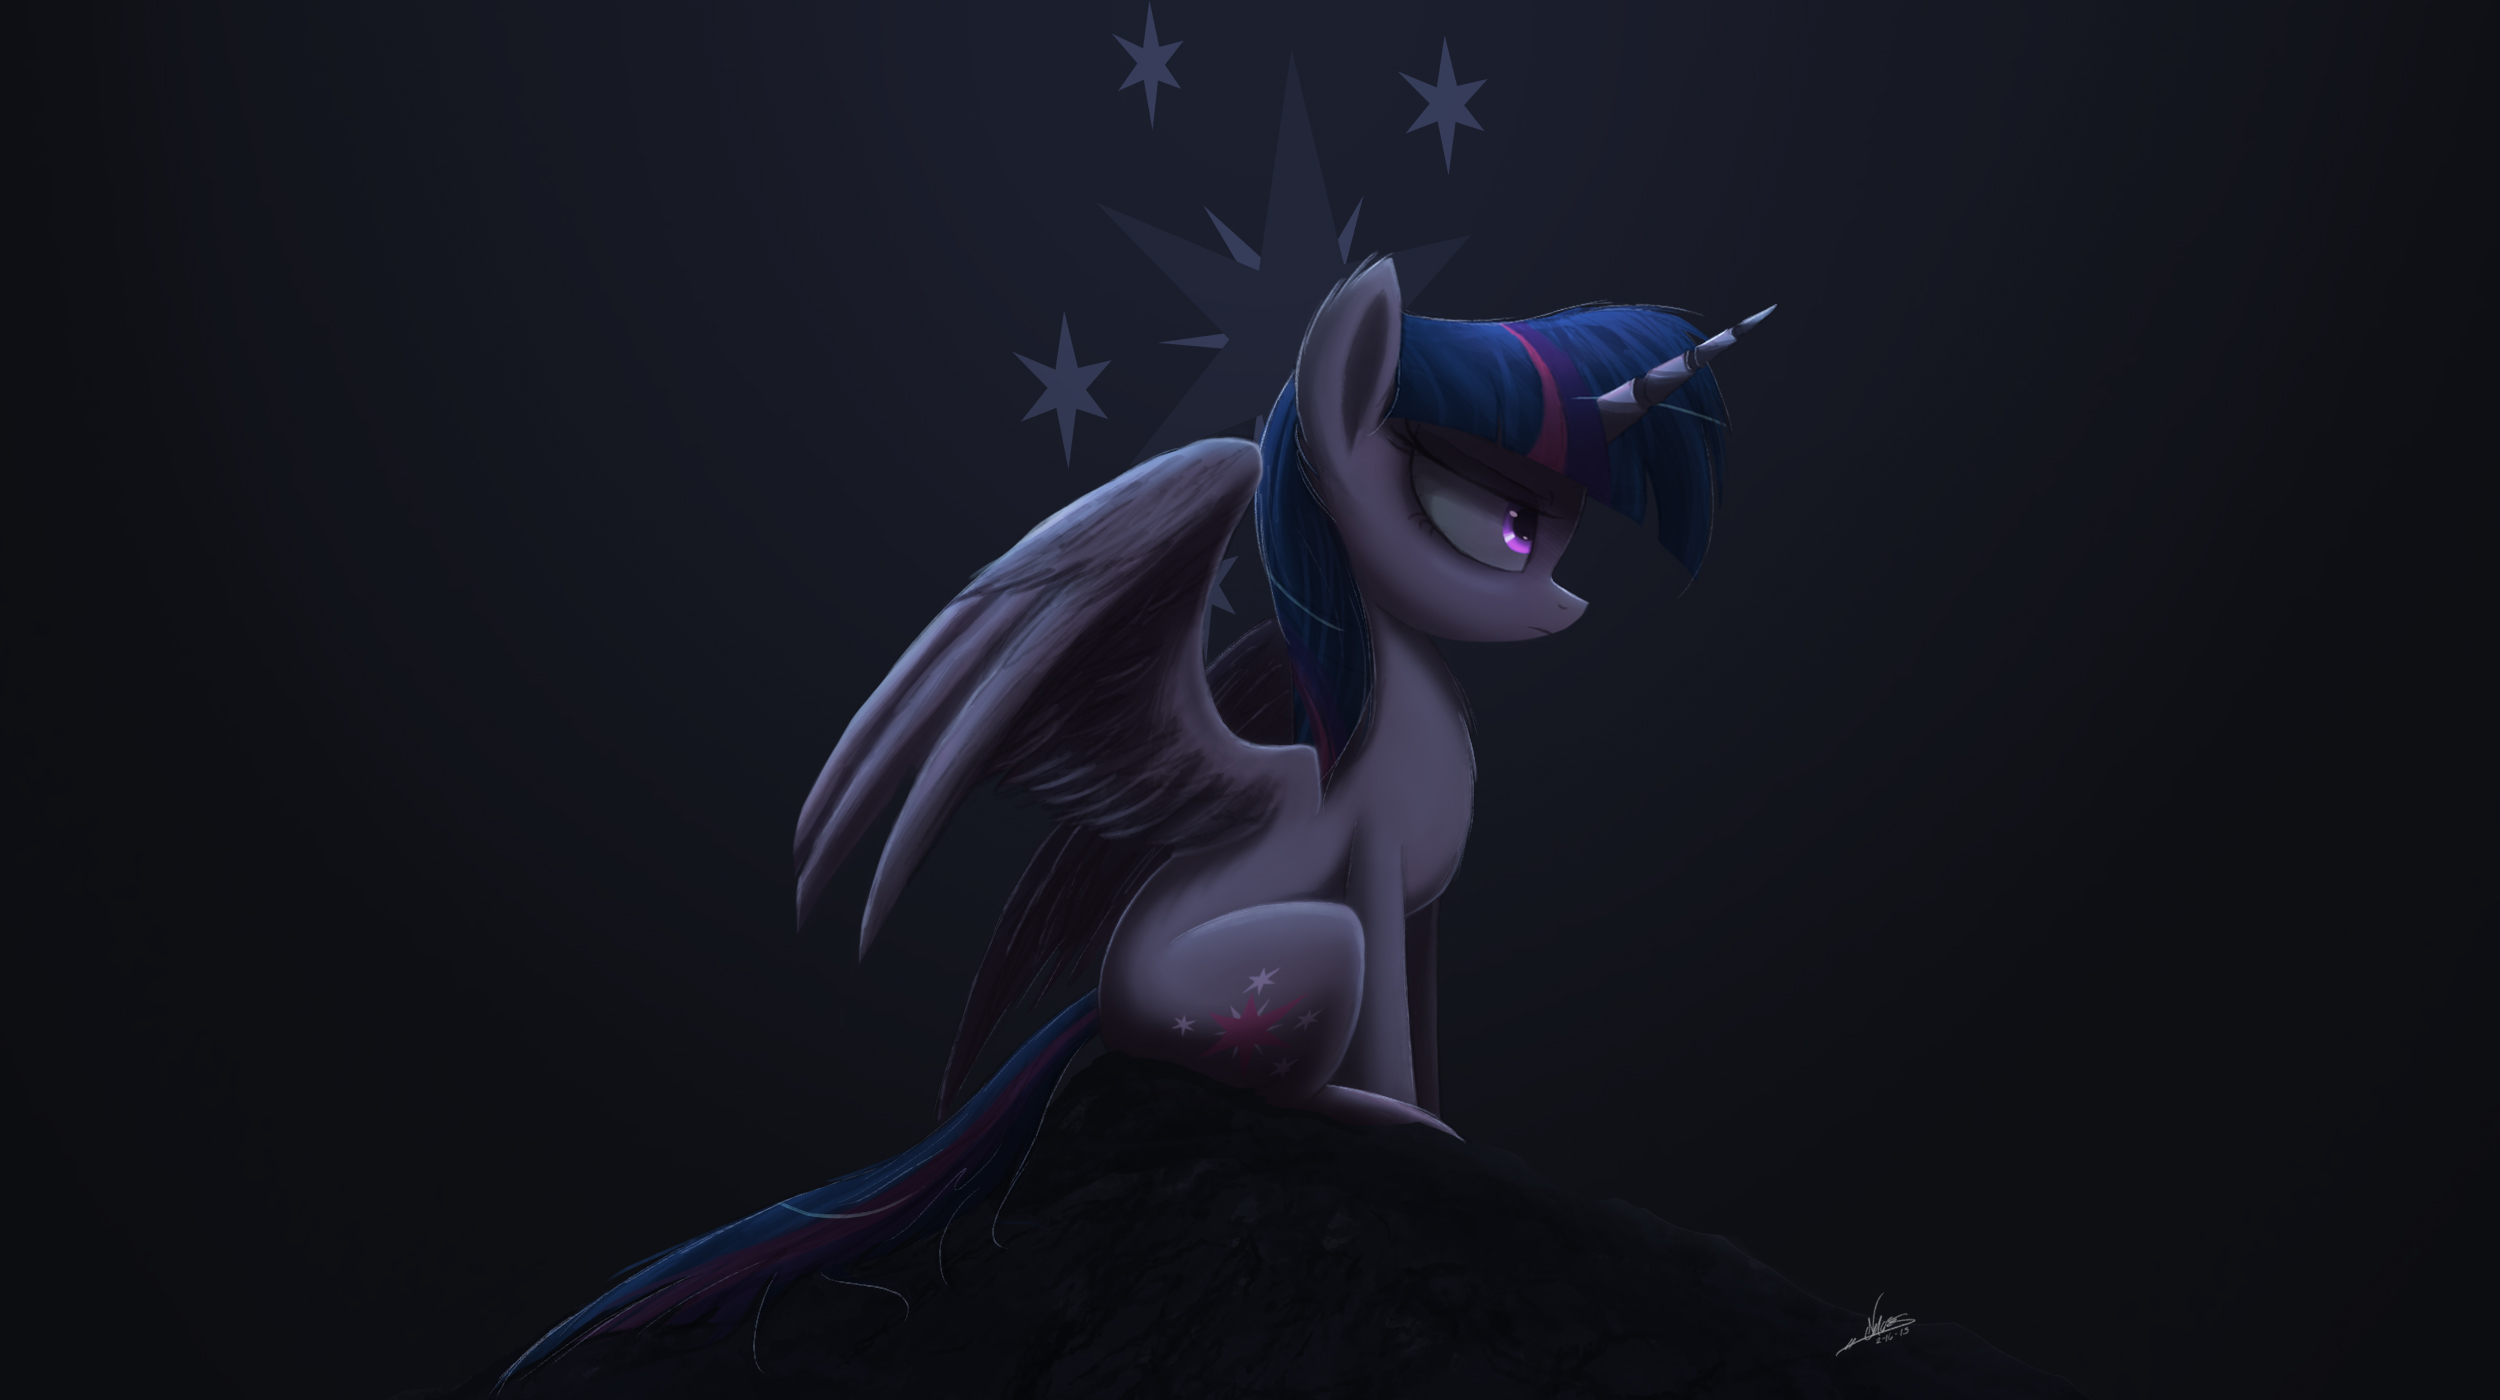 http://orig08.deviantart.net/5910/f/2015/048/d/4/the_fourth_alicorn_by_ncmares-d8icdie.jpg